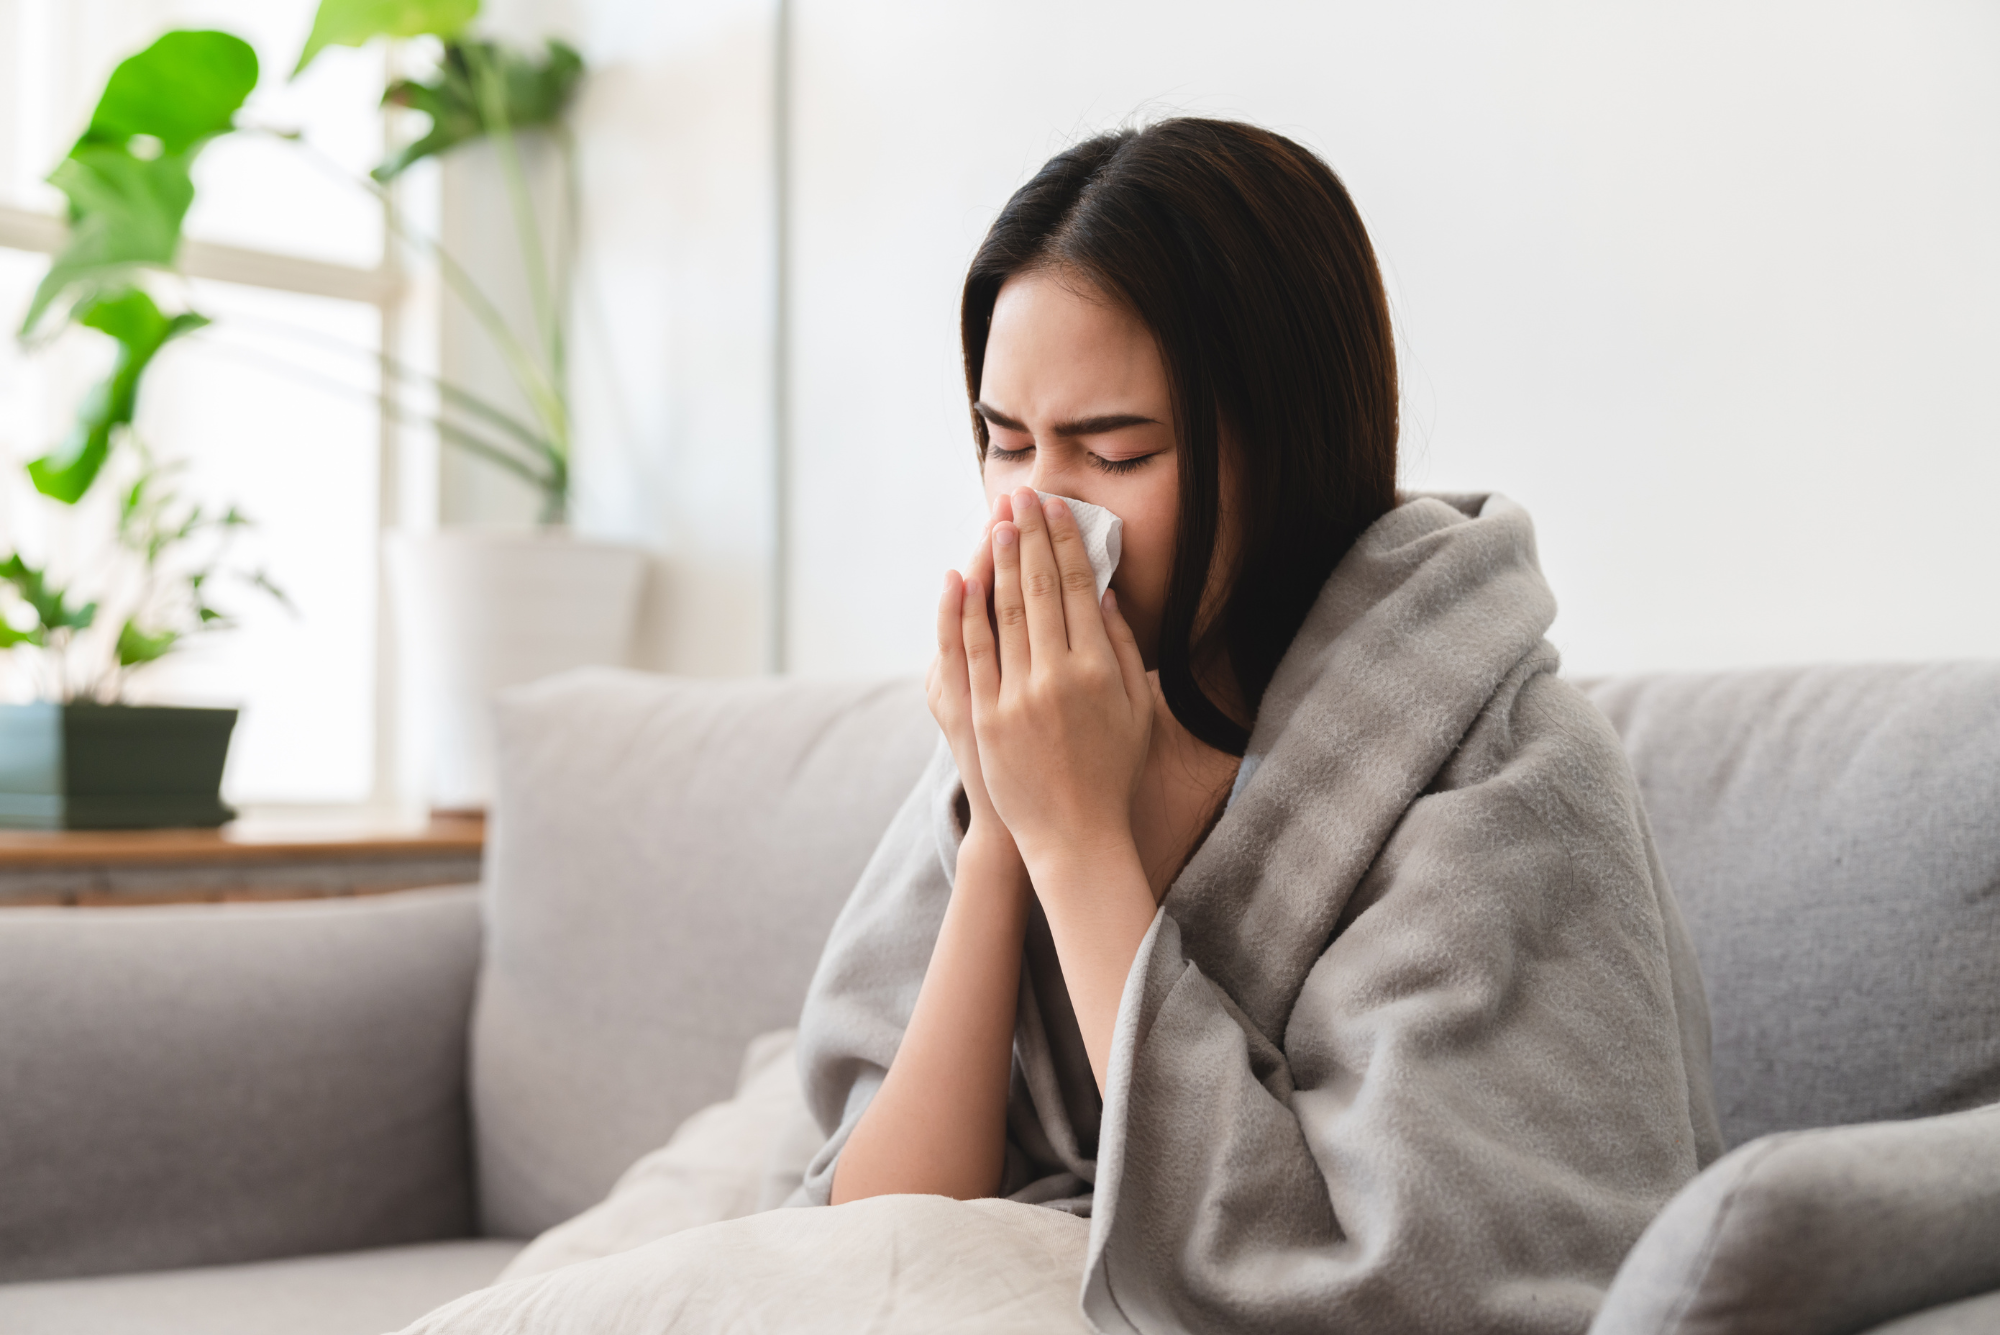 Unwell lady blowing nose in a blanket.